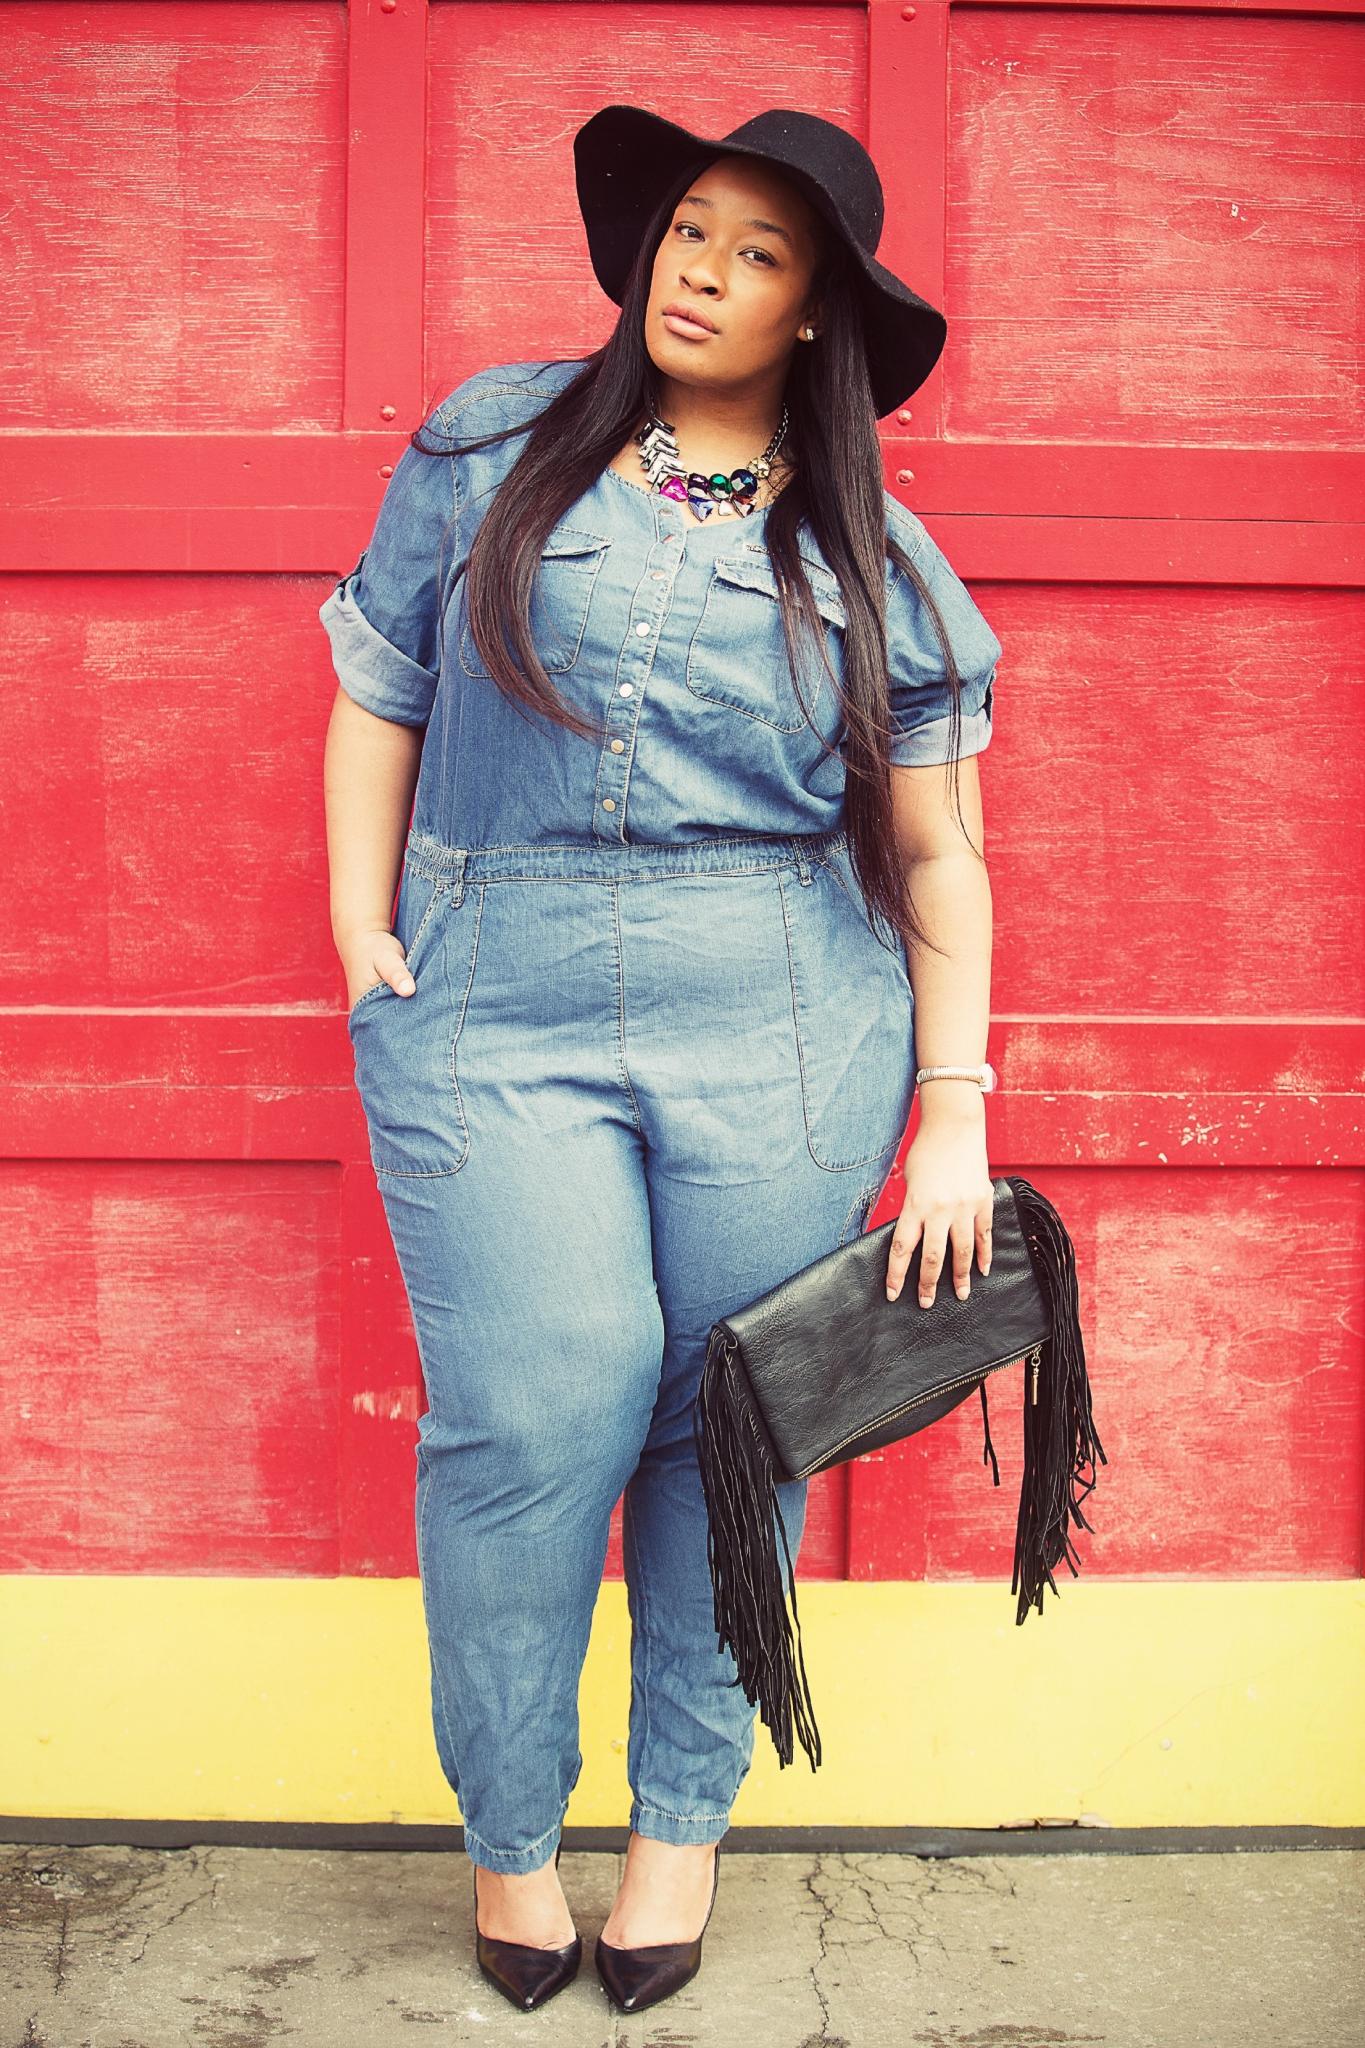 A Curvy Girl's Guide To Denim
